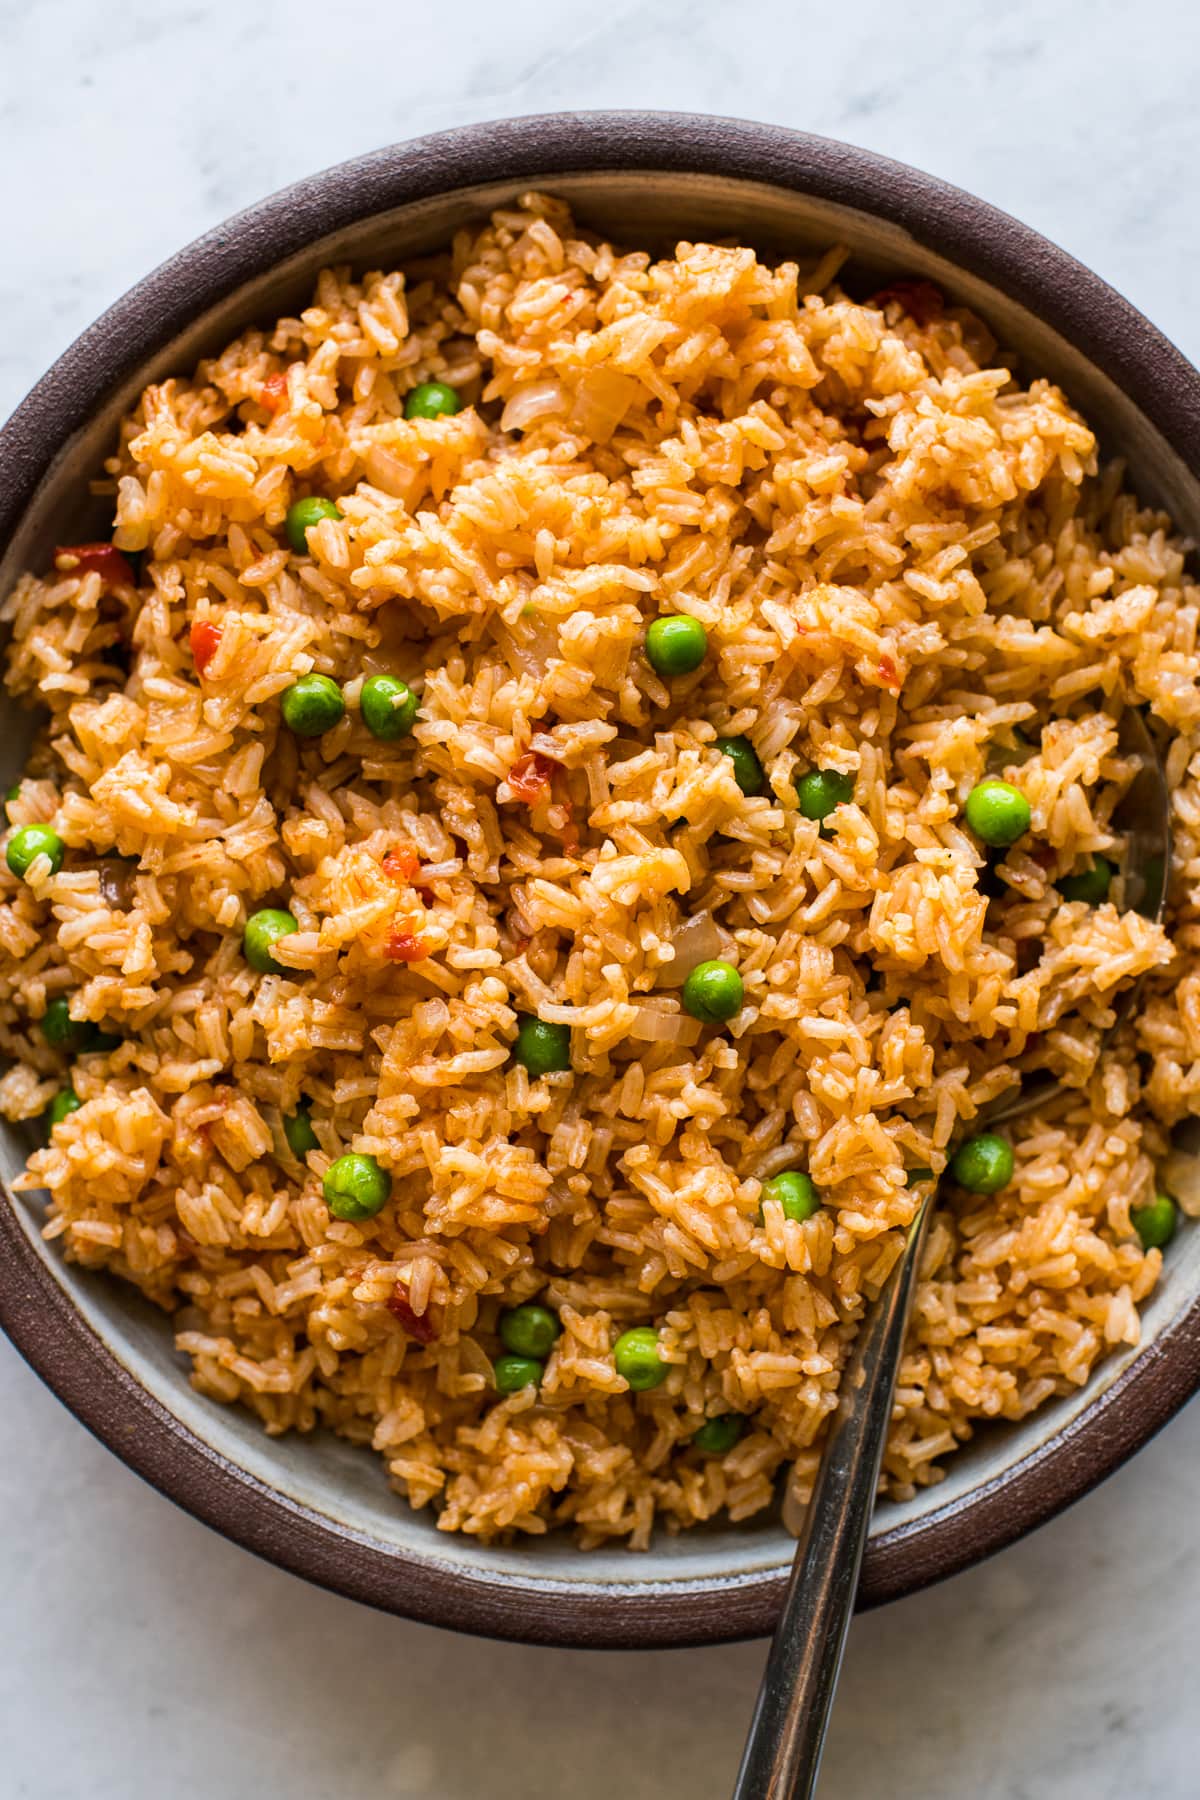 https://www.isabeleats.com/wp-content/uploads/2022/09/instant-pot-mexican-rice-small-7.jpg